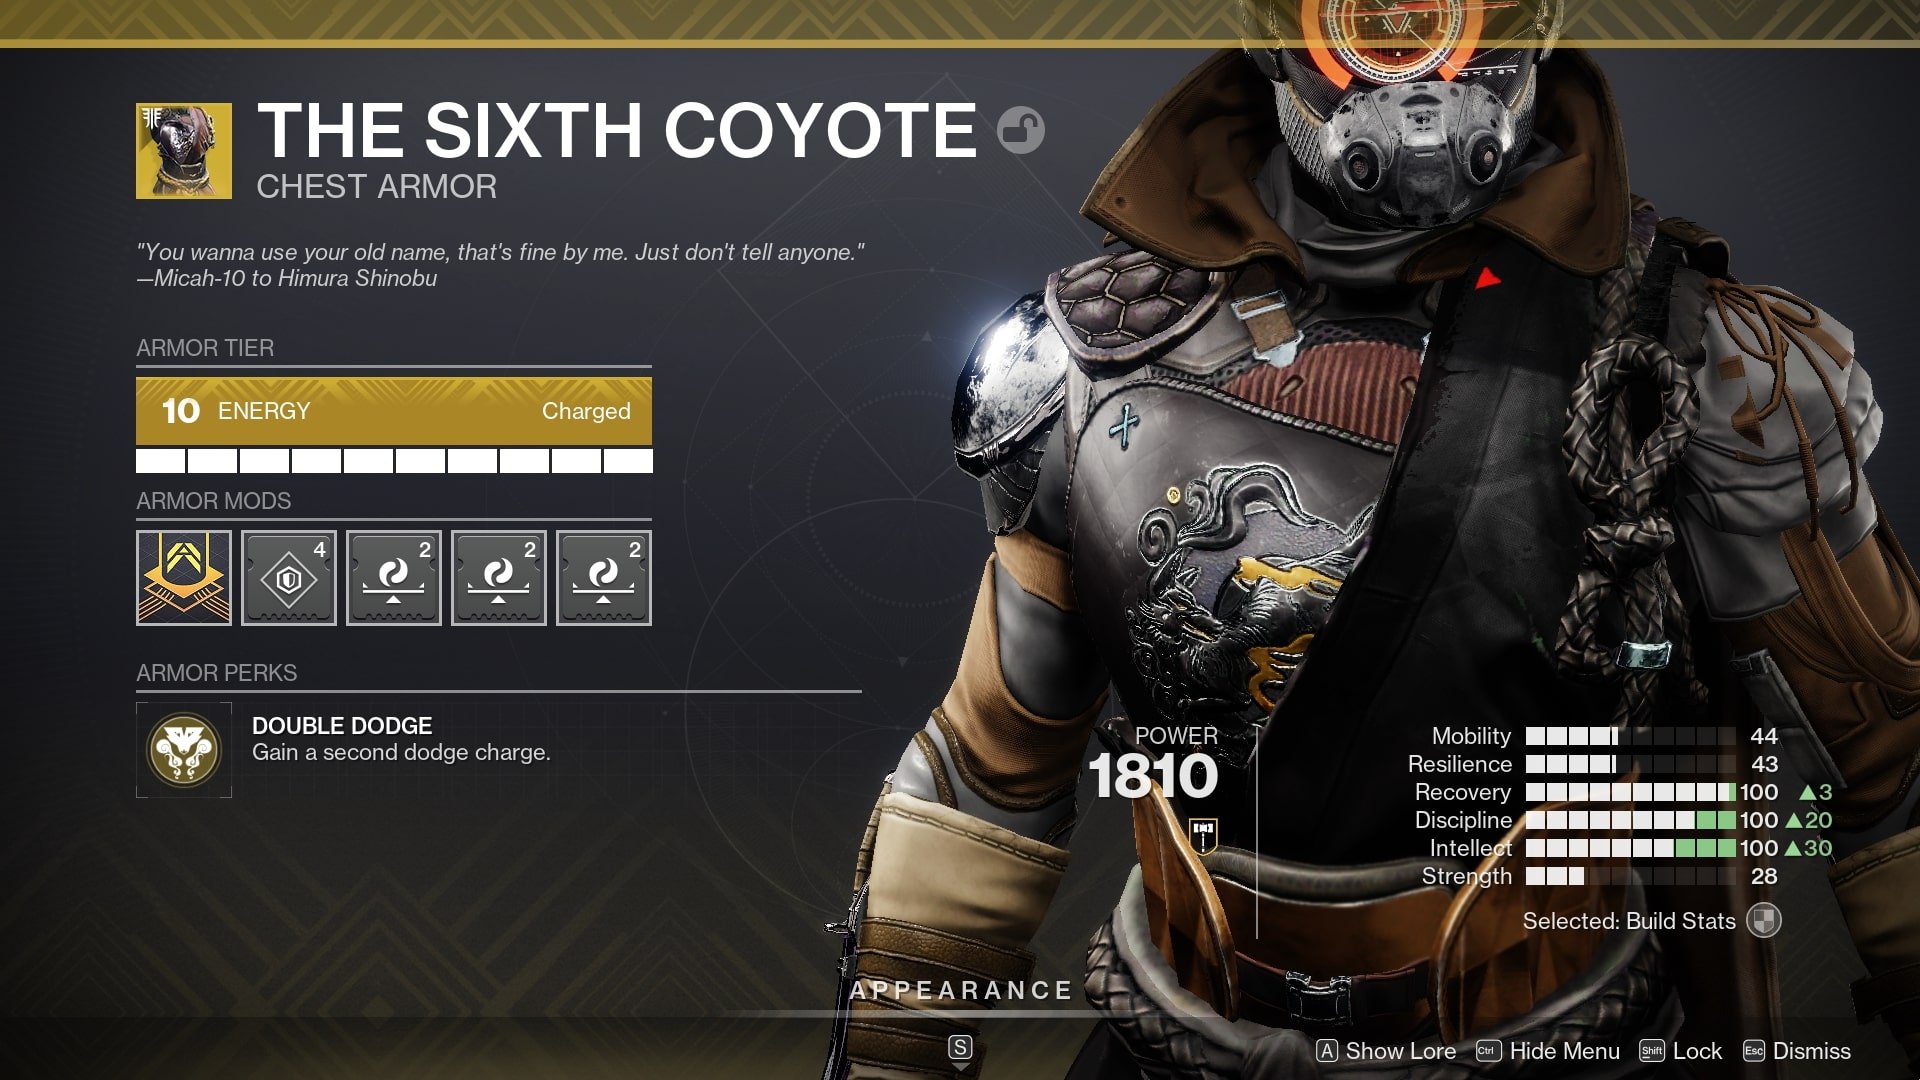 The Sixth Coyote